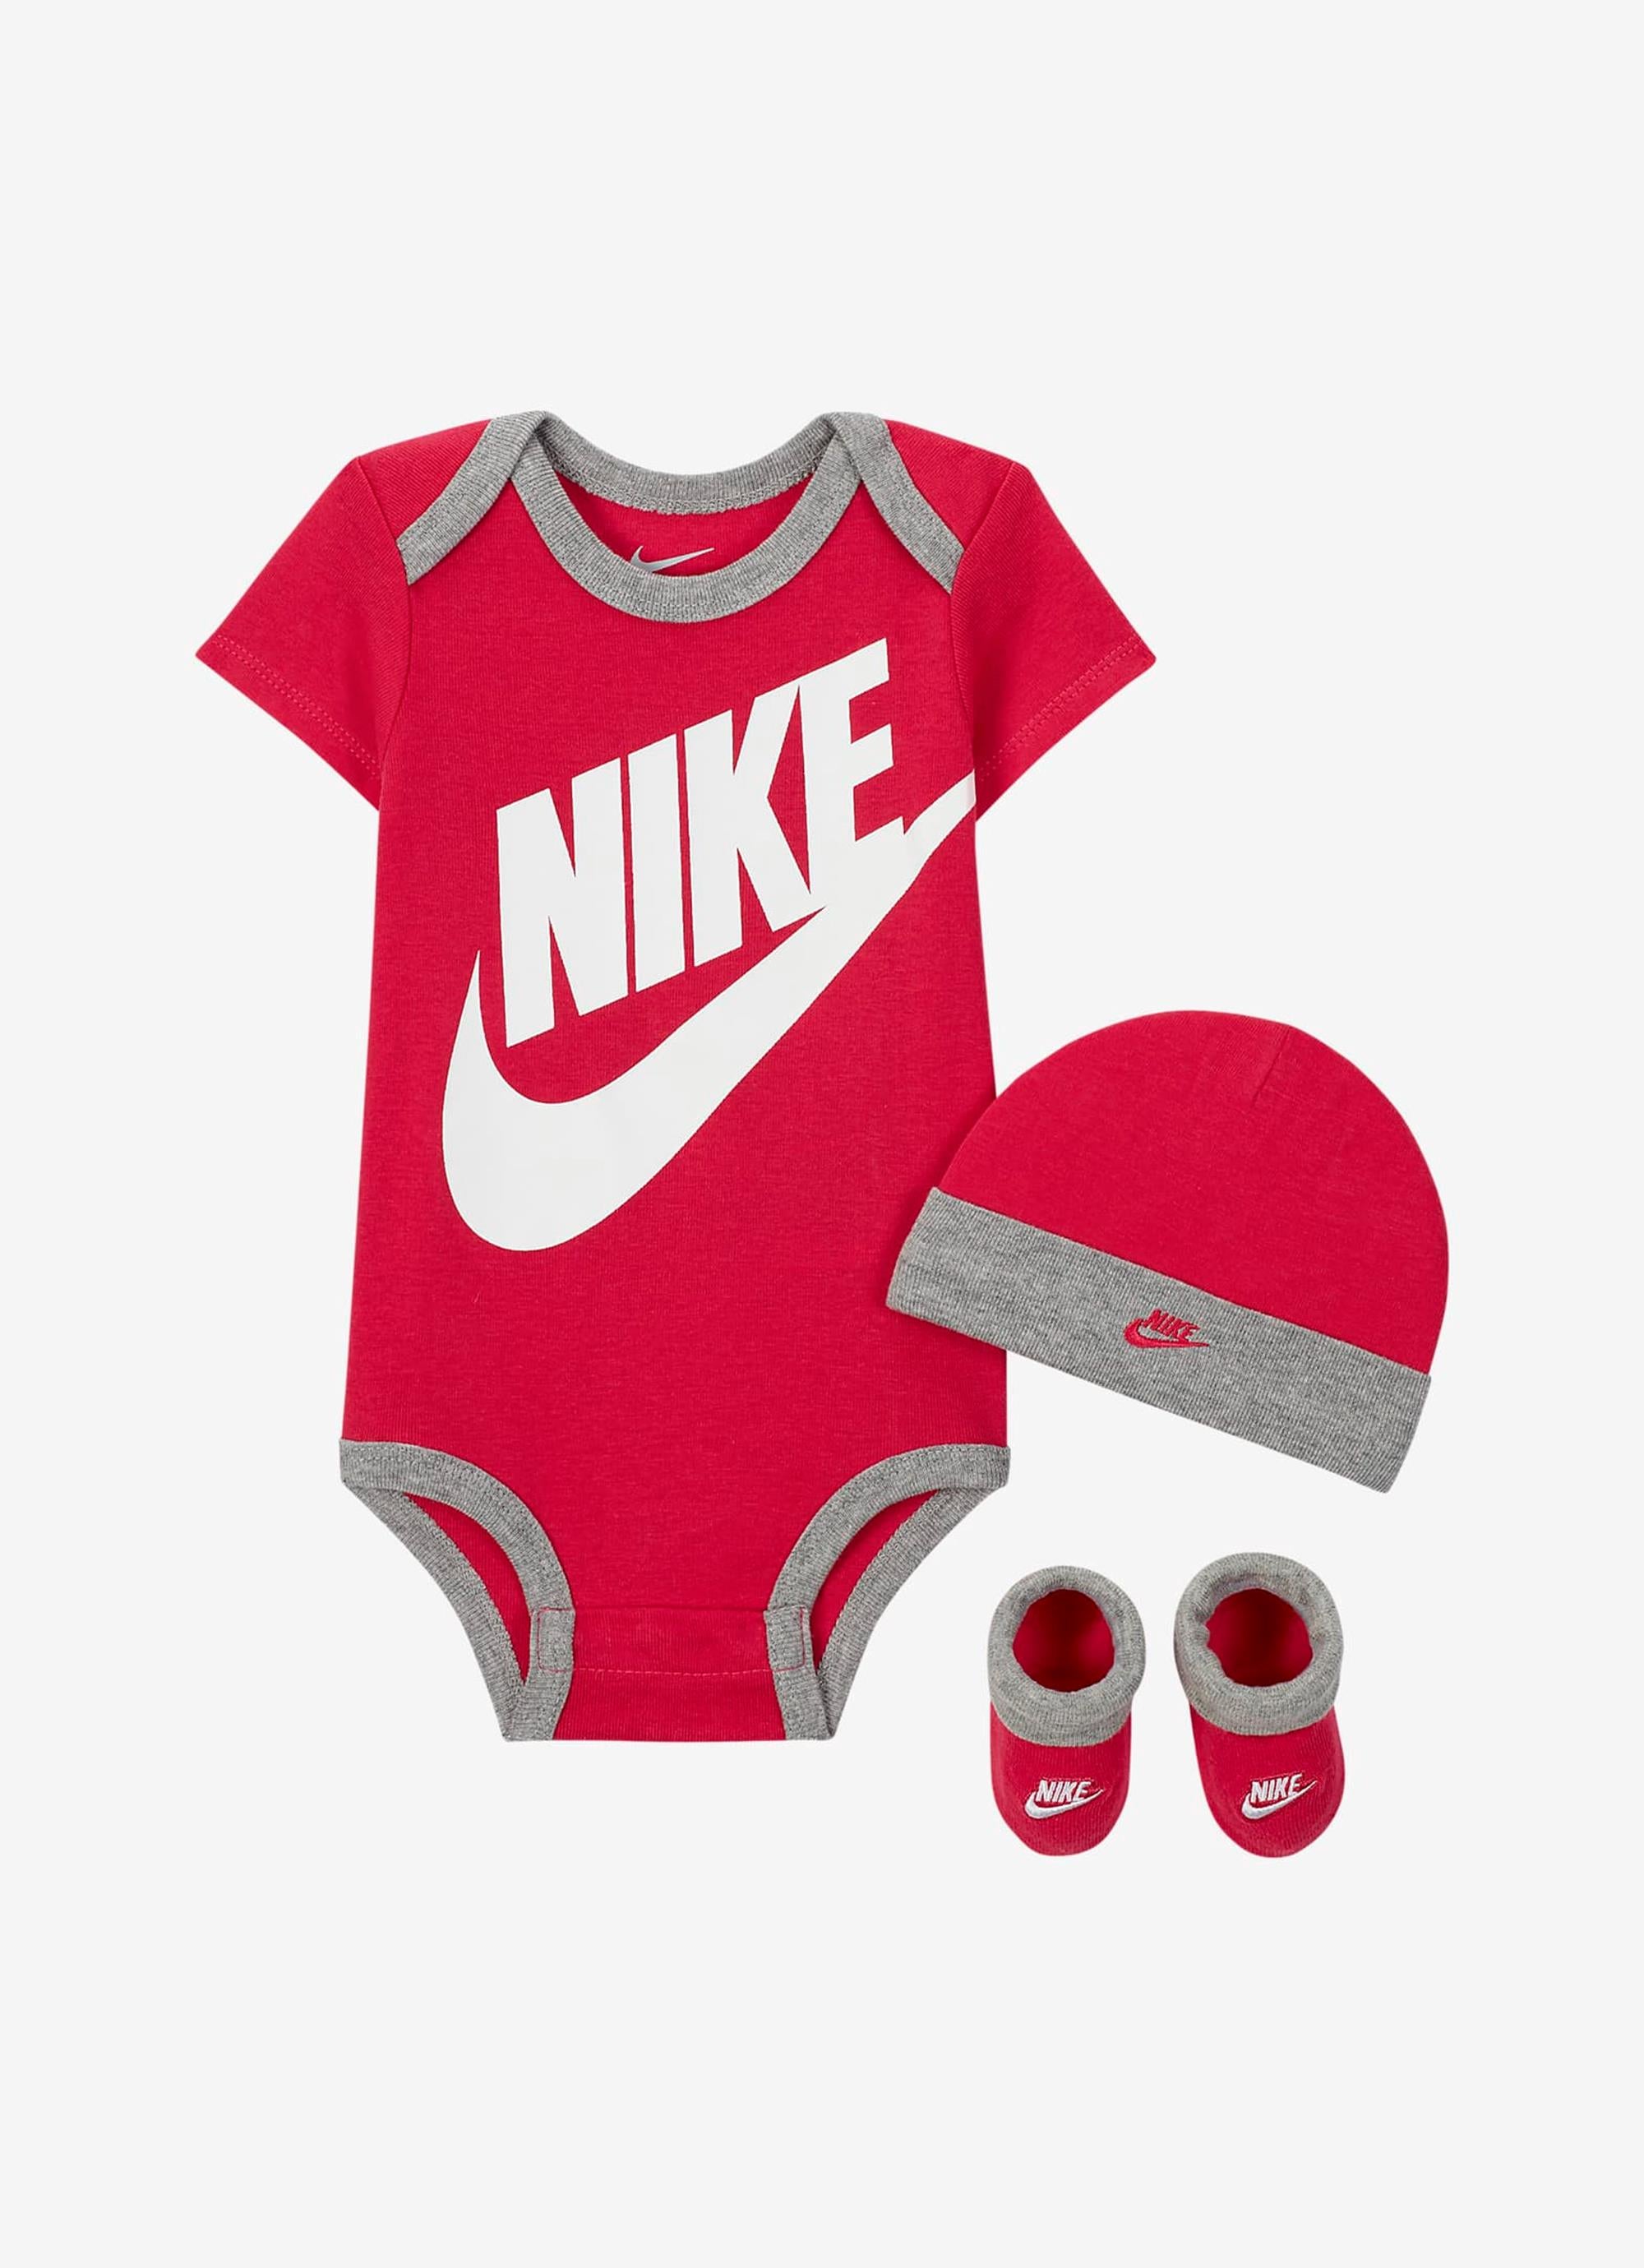 Letzte Preissenkung Nike Futura Logo Hat/body Suit in Pink | Bootie Red Infant Rat 3pc Set 